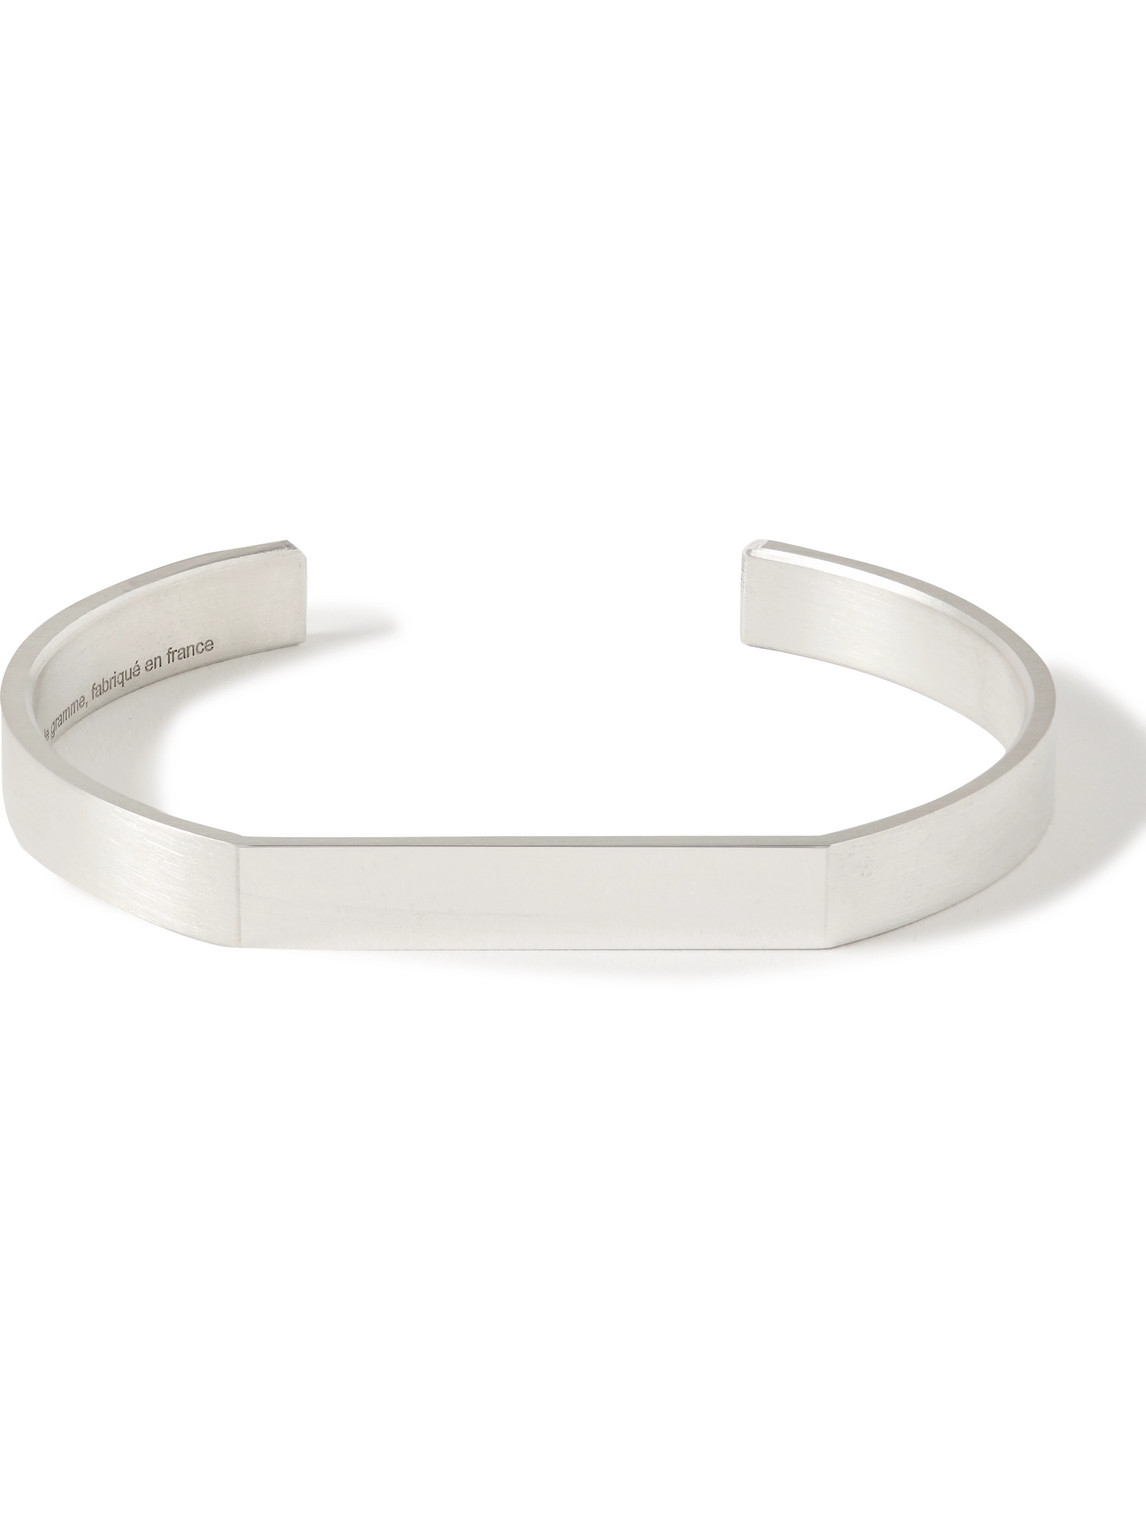 Le Gramme Ribbon 21g Recycled Brushed Sterling Silver Cuff